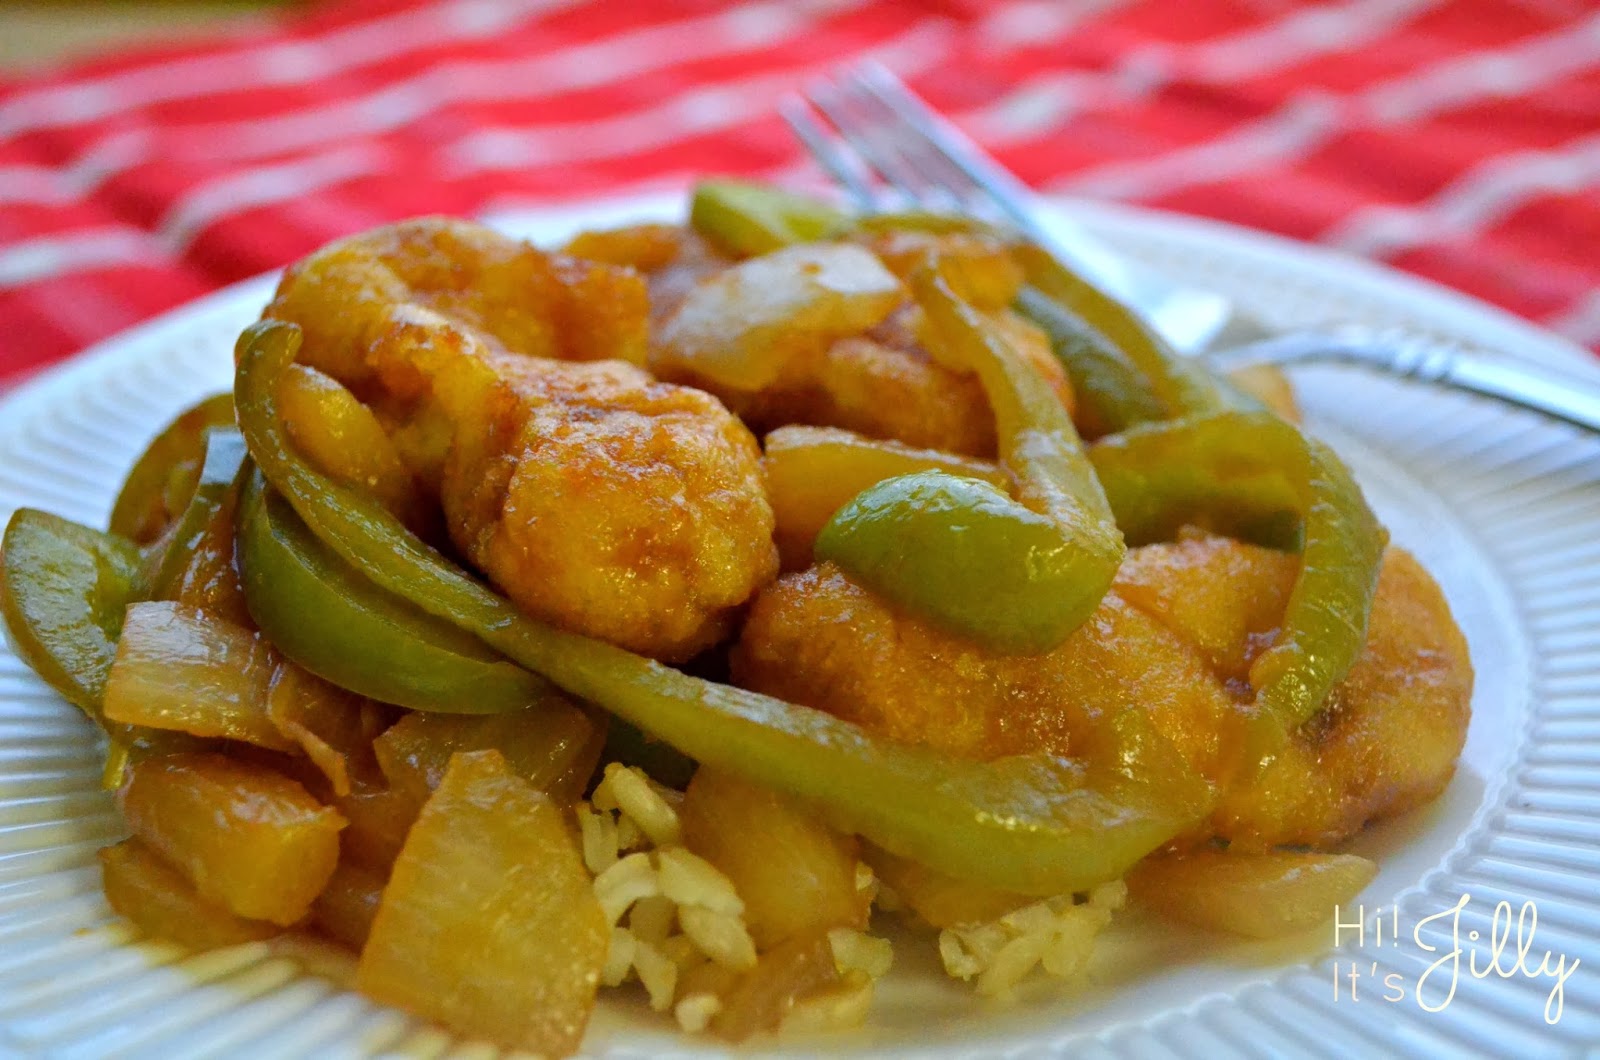 Try this super easy and yummy Pineapple Sweet & Sour Chicken from Hi! It's Jilly! #recipe #chicken #LuvTyson #cbias